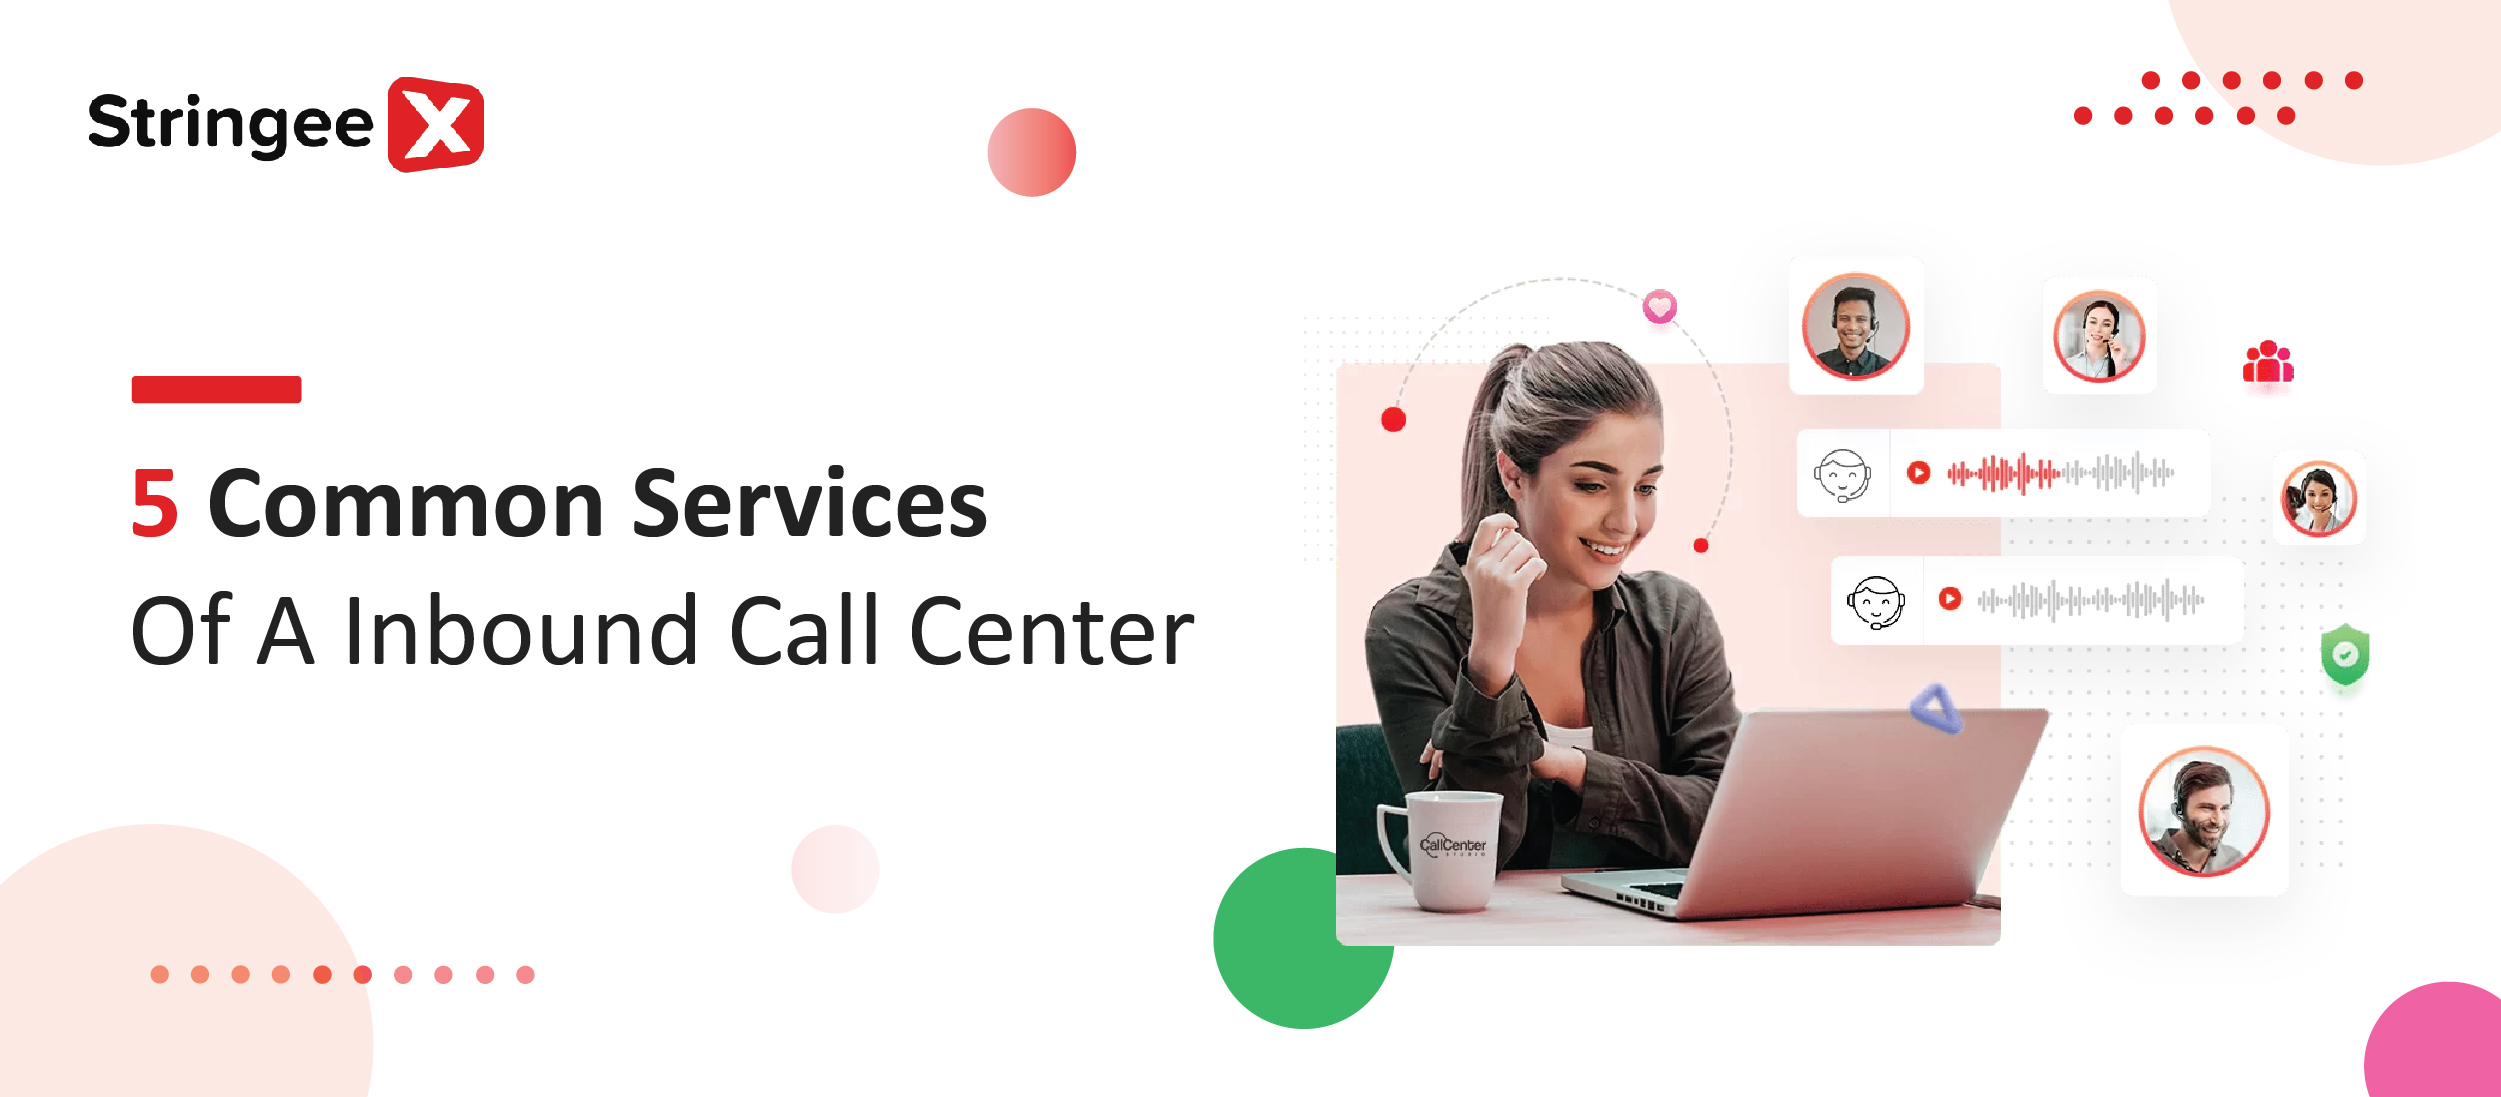 5 Common Services Of A Inbound Call Center